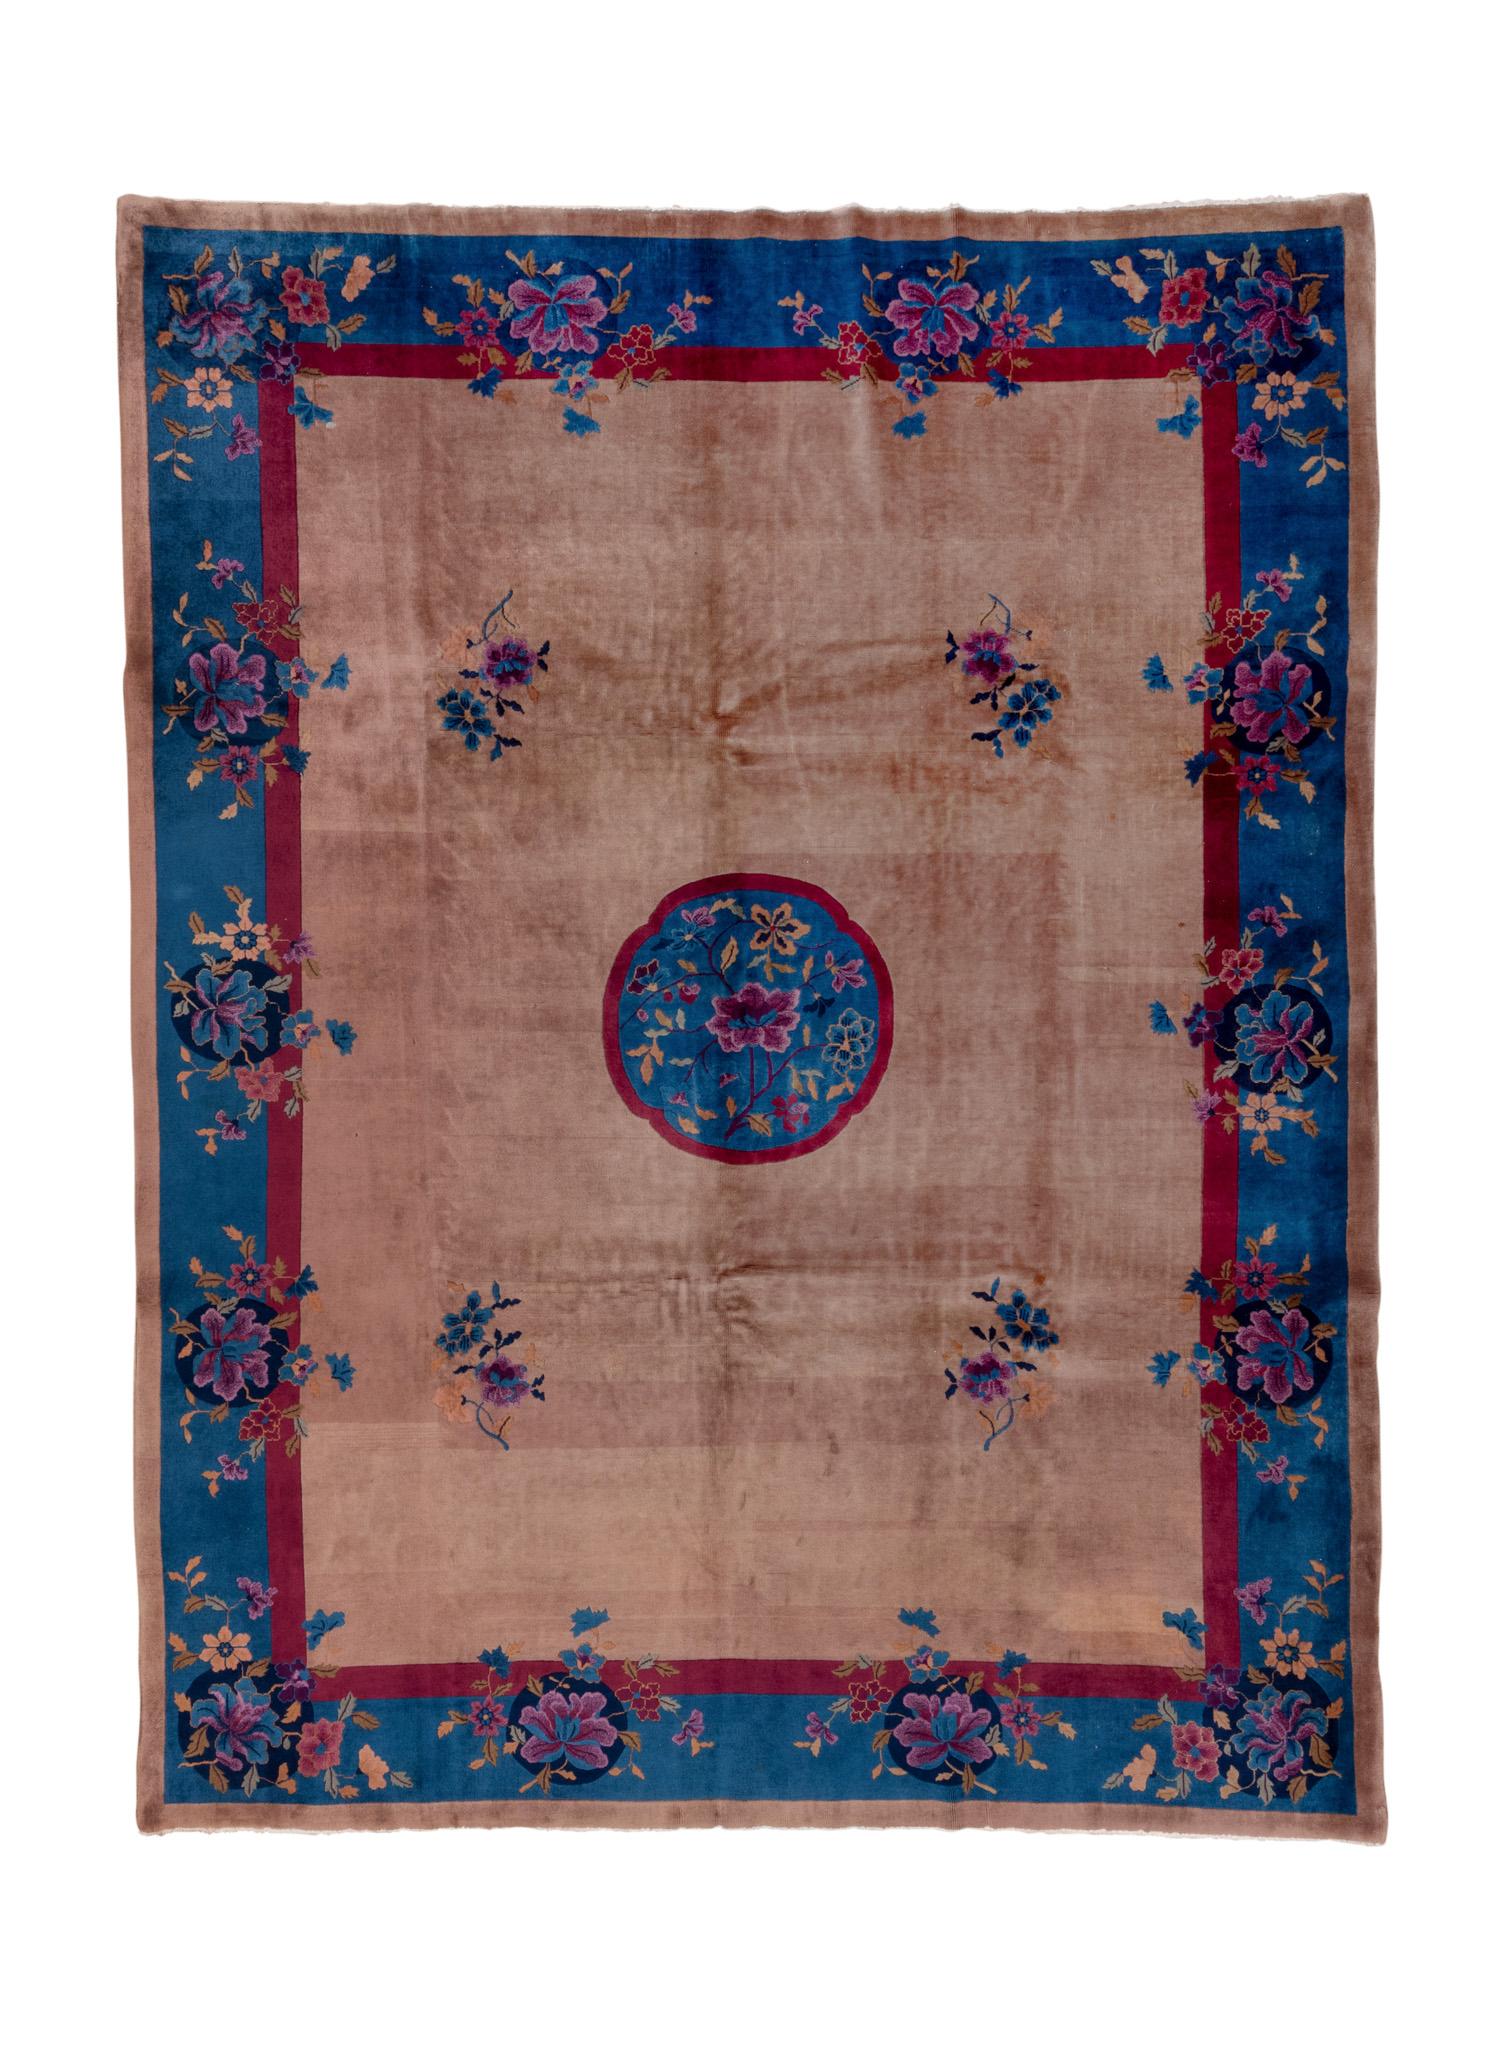 A Chinese Rug circa 1920. Hand Knotted, made of 100% wool yarn. 